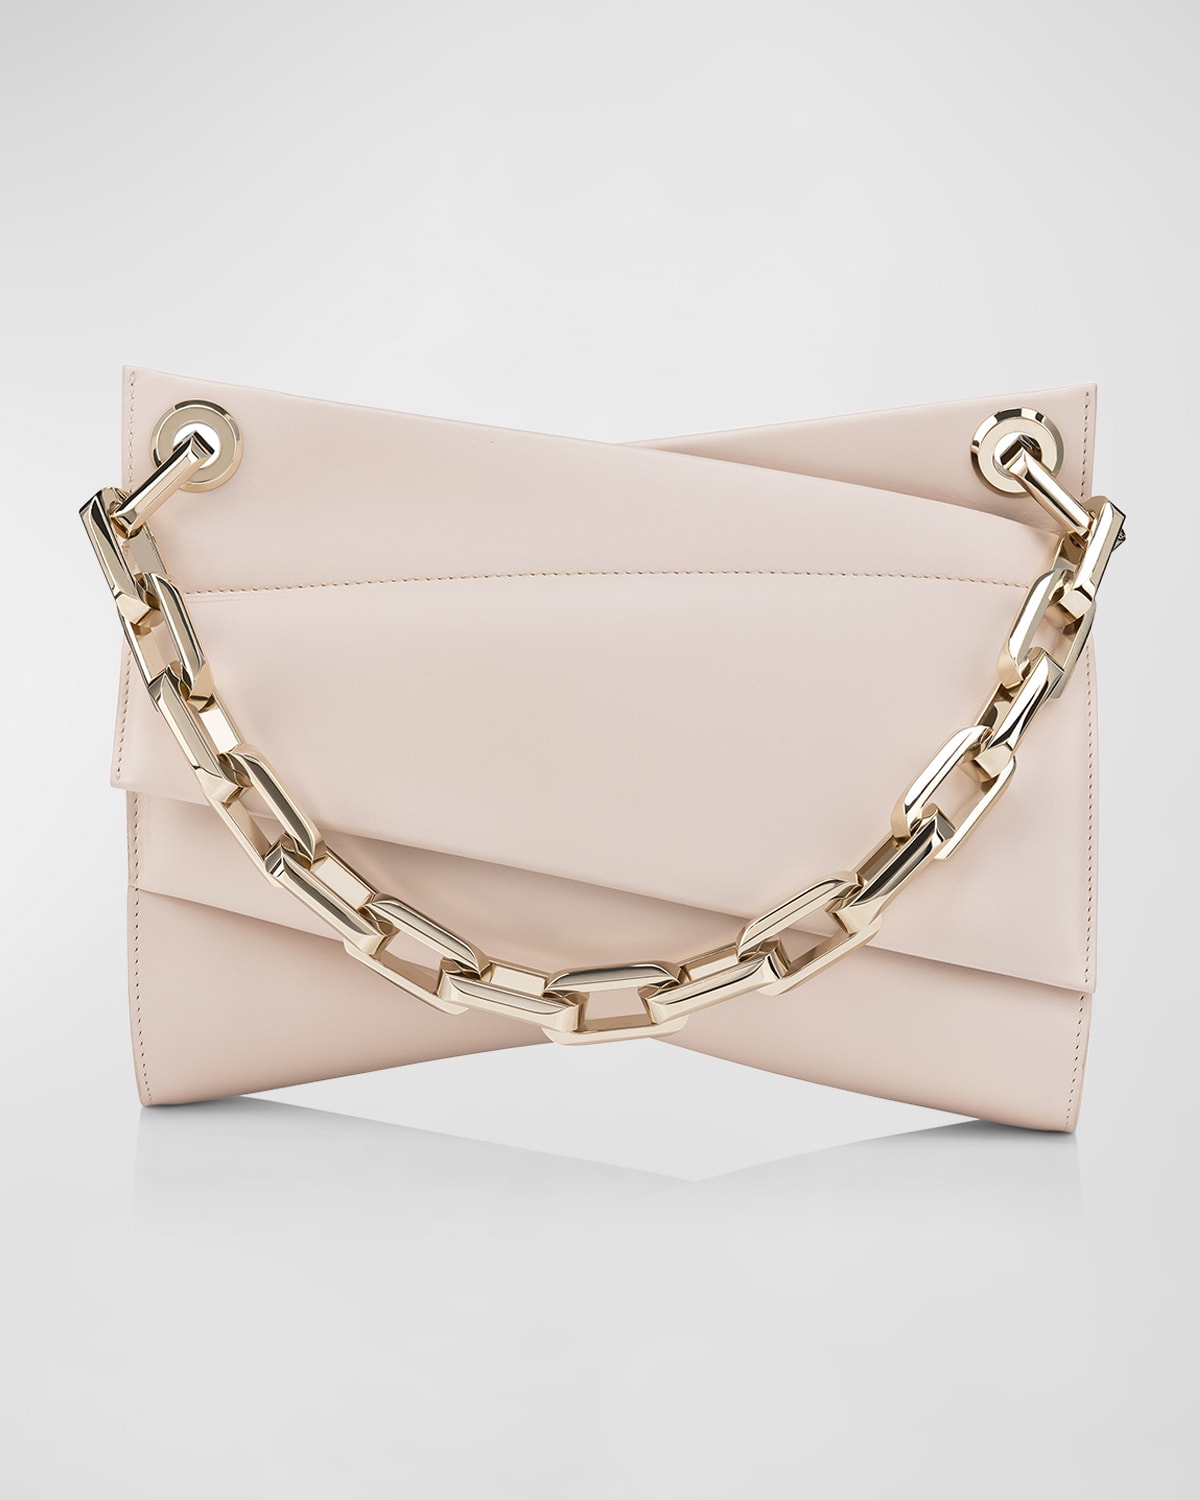 Loubitwist Chain Shoulder Bag in Leather